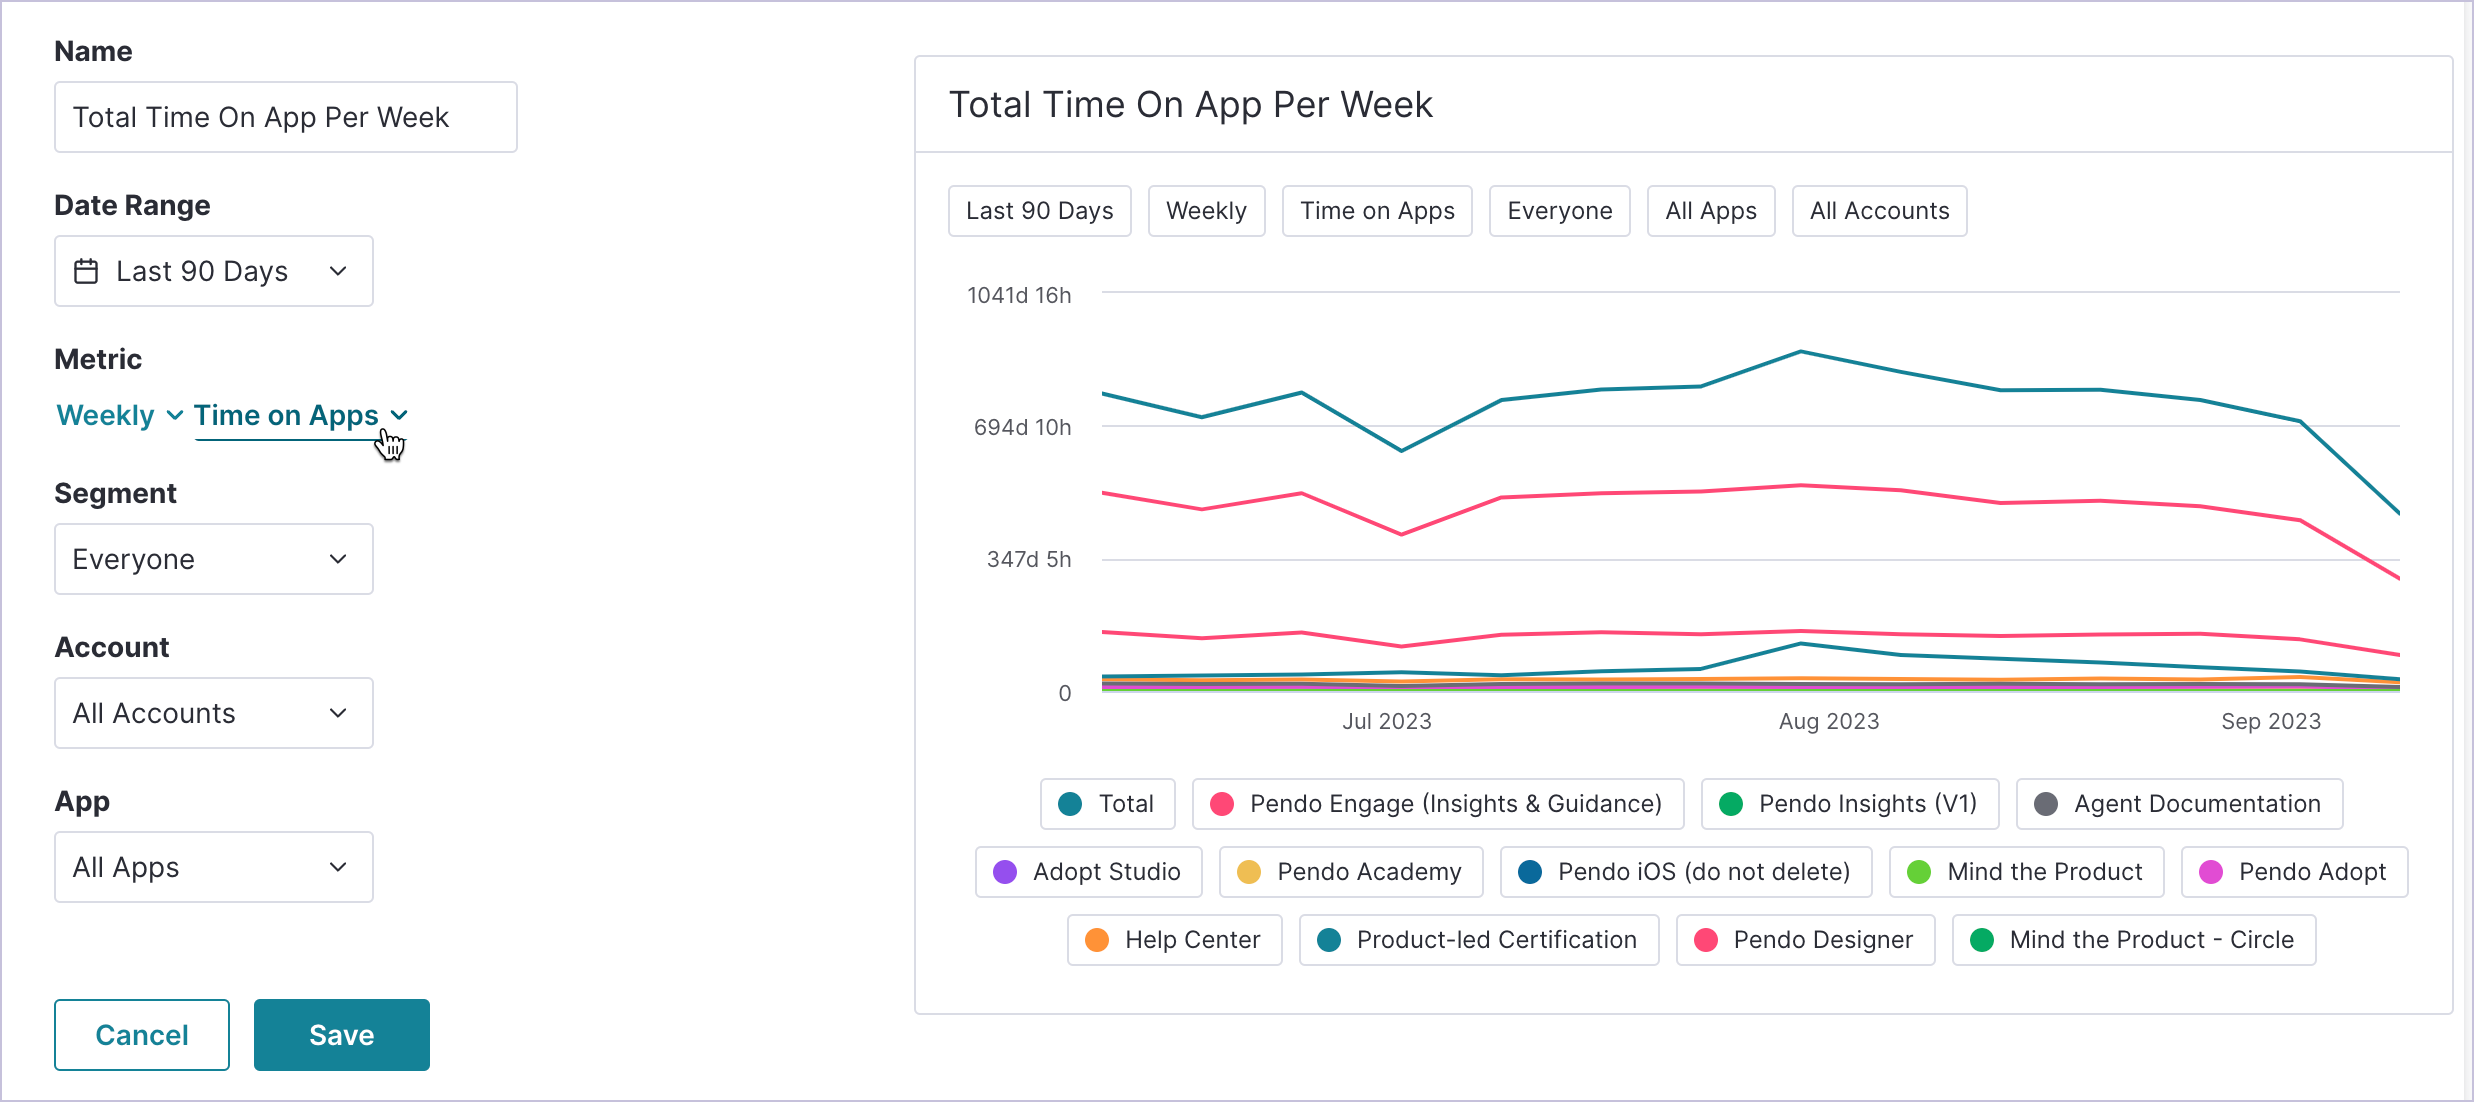 Dashboard_TotalTimeOnAppPerWeek_TimeOnApps.png